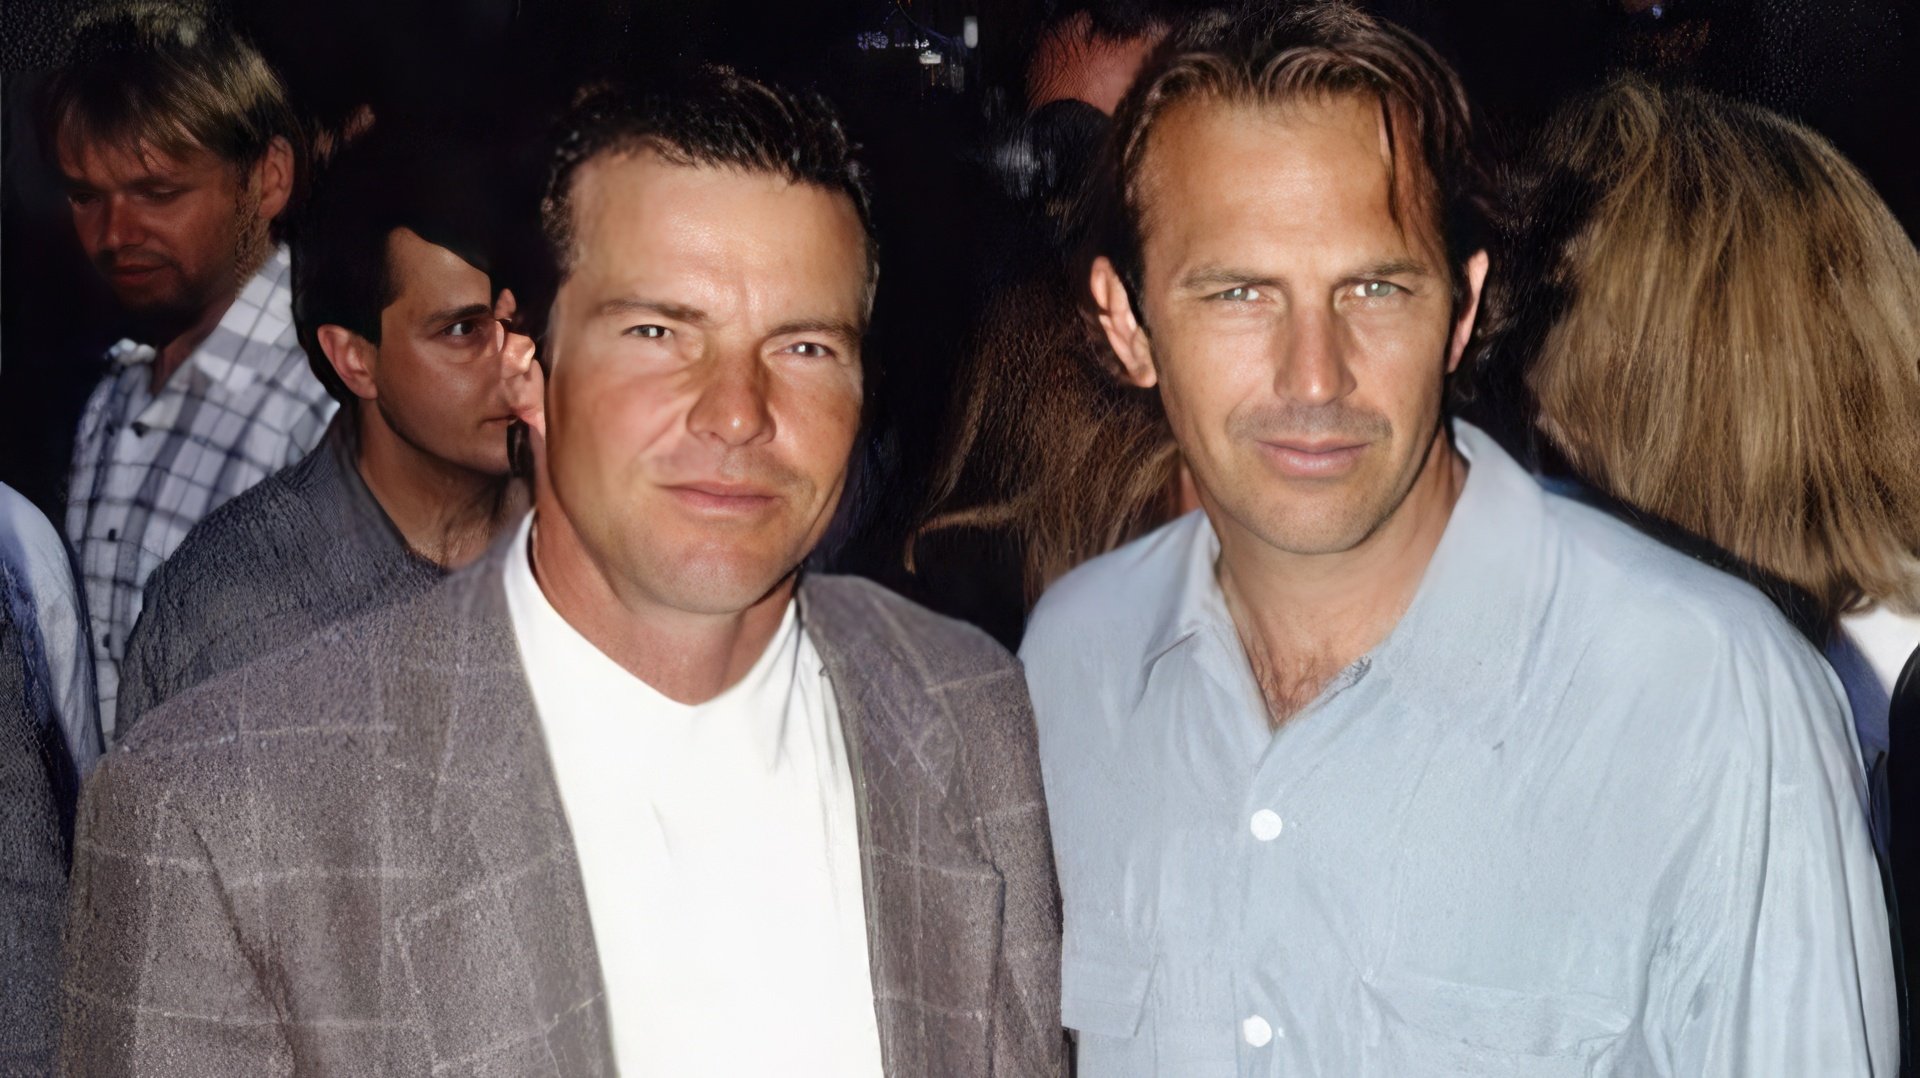 Dennis Quaid and Kevin Costner